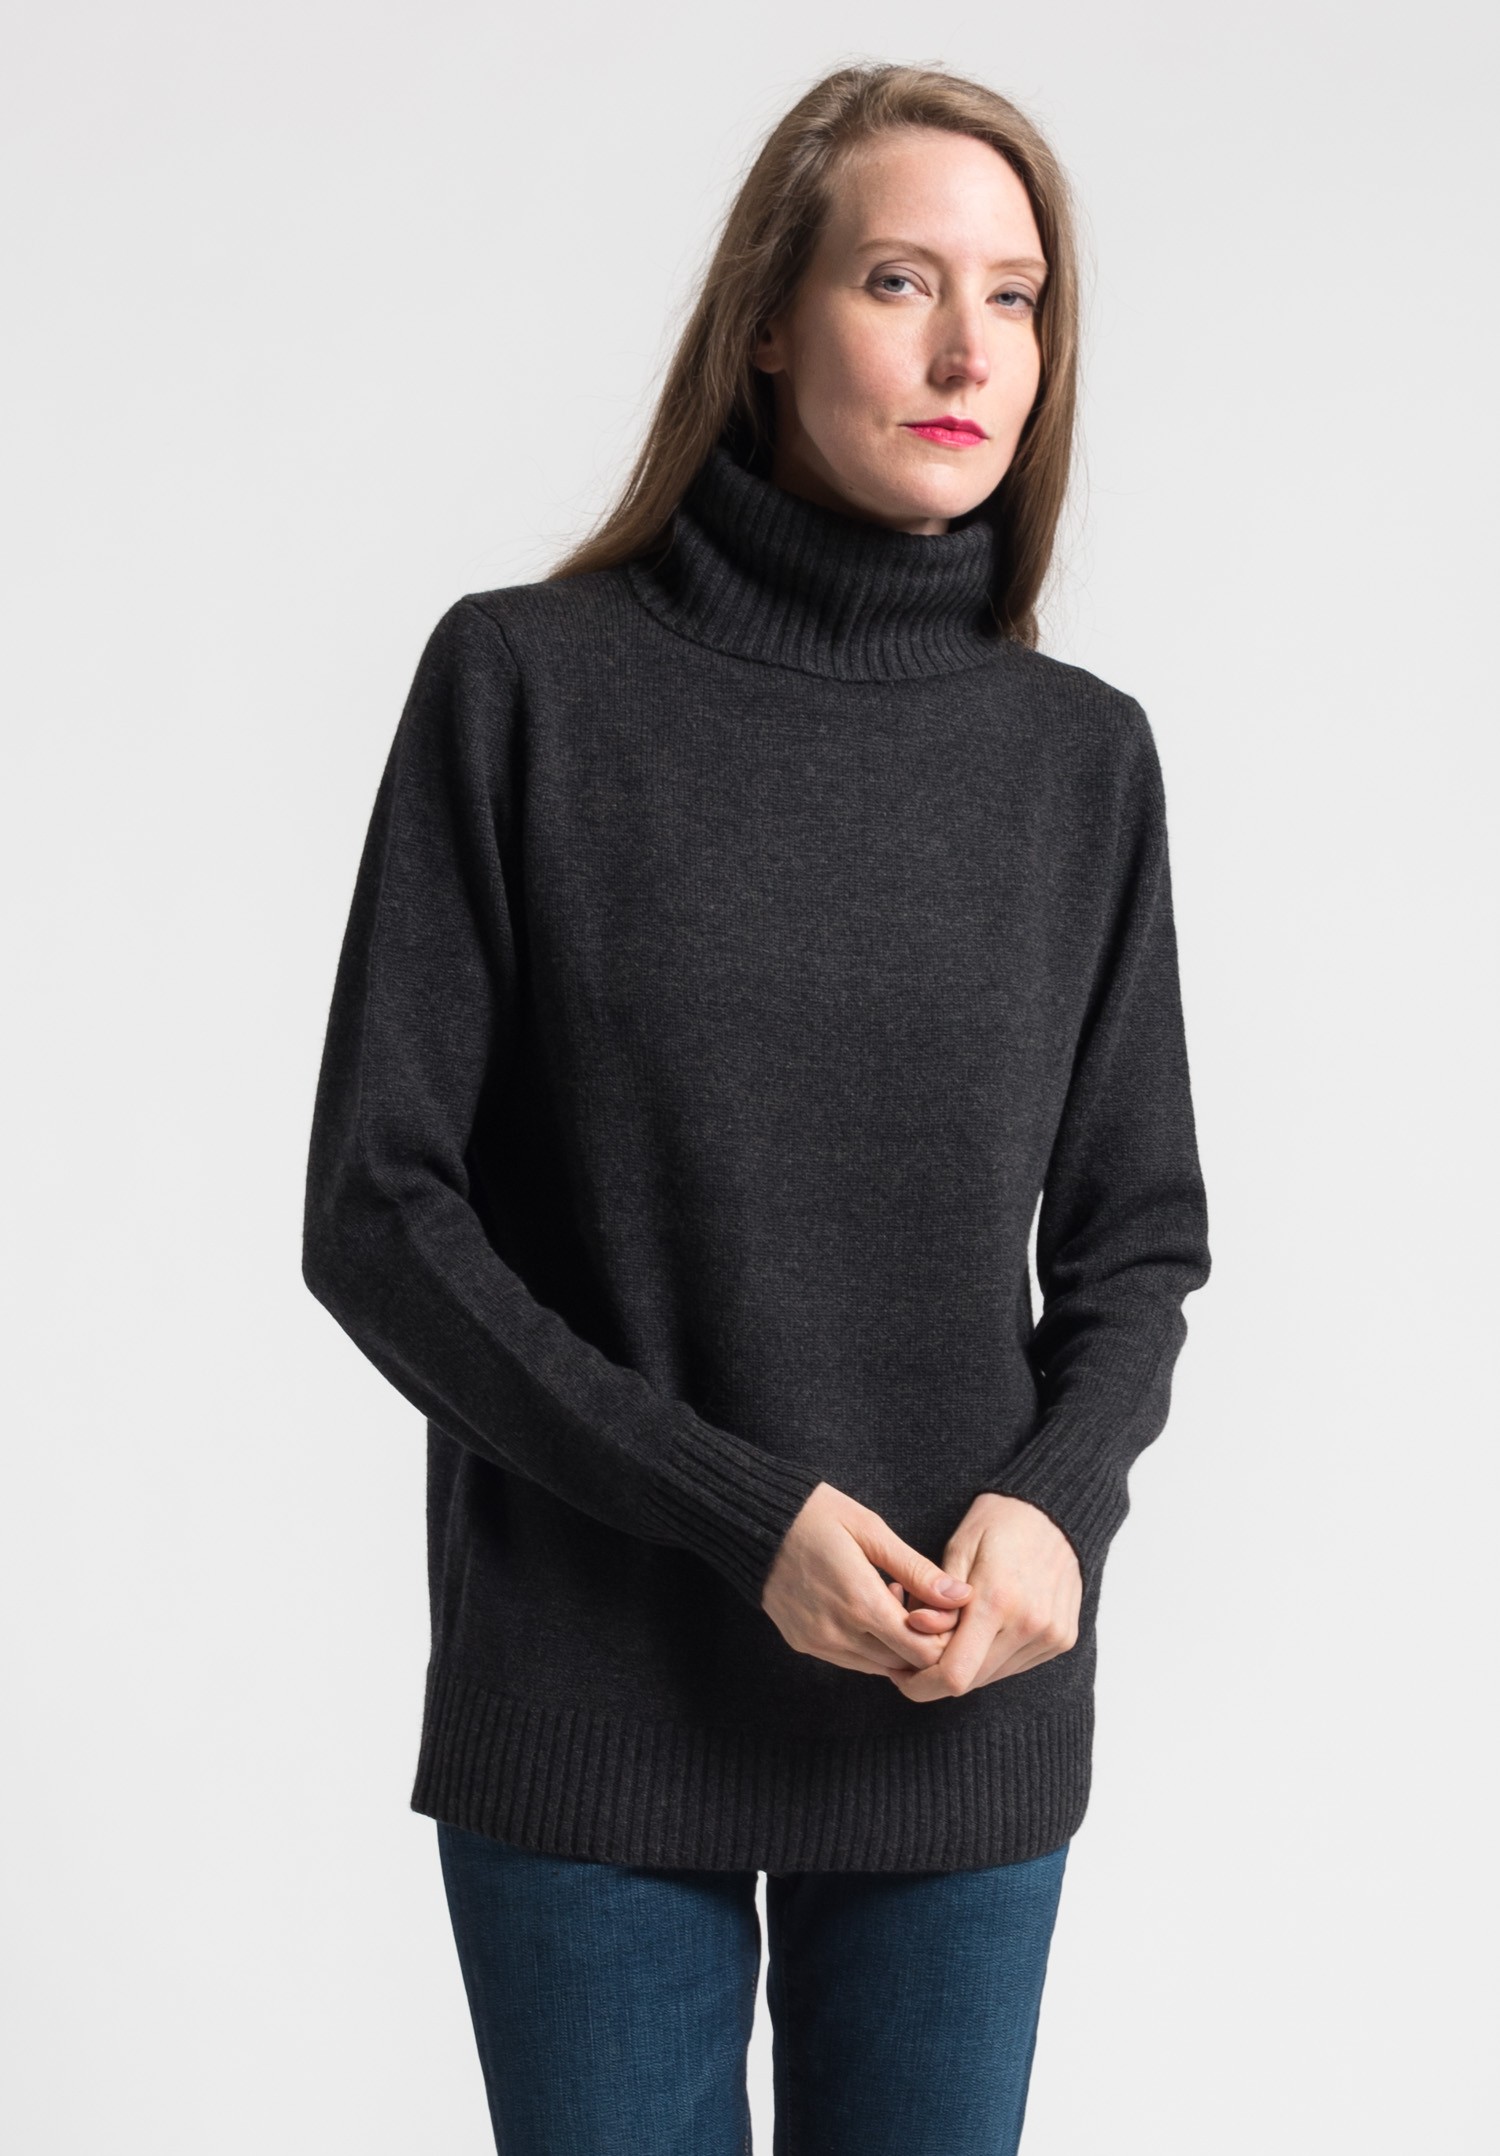 Pauw Wool/Cashmere Turtleneck Sweater in Charcoal | Santa Fe Dry Goods ...